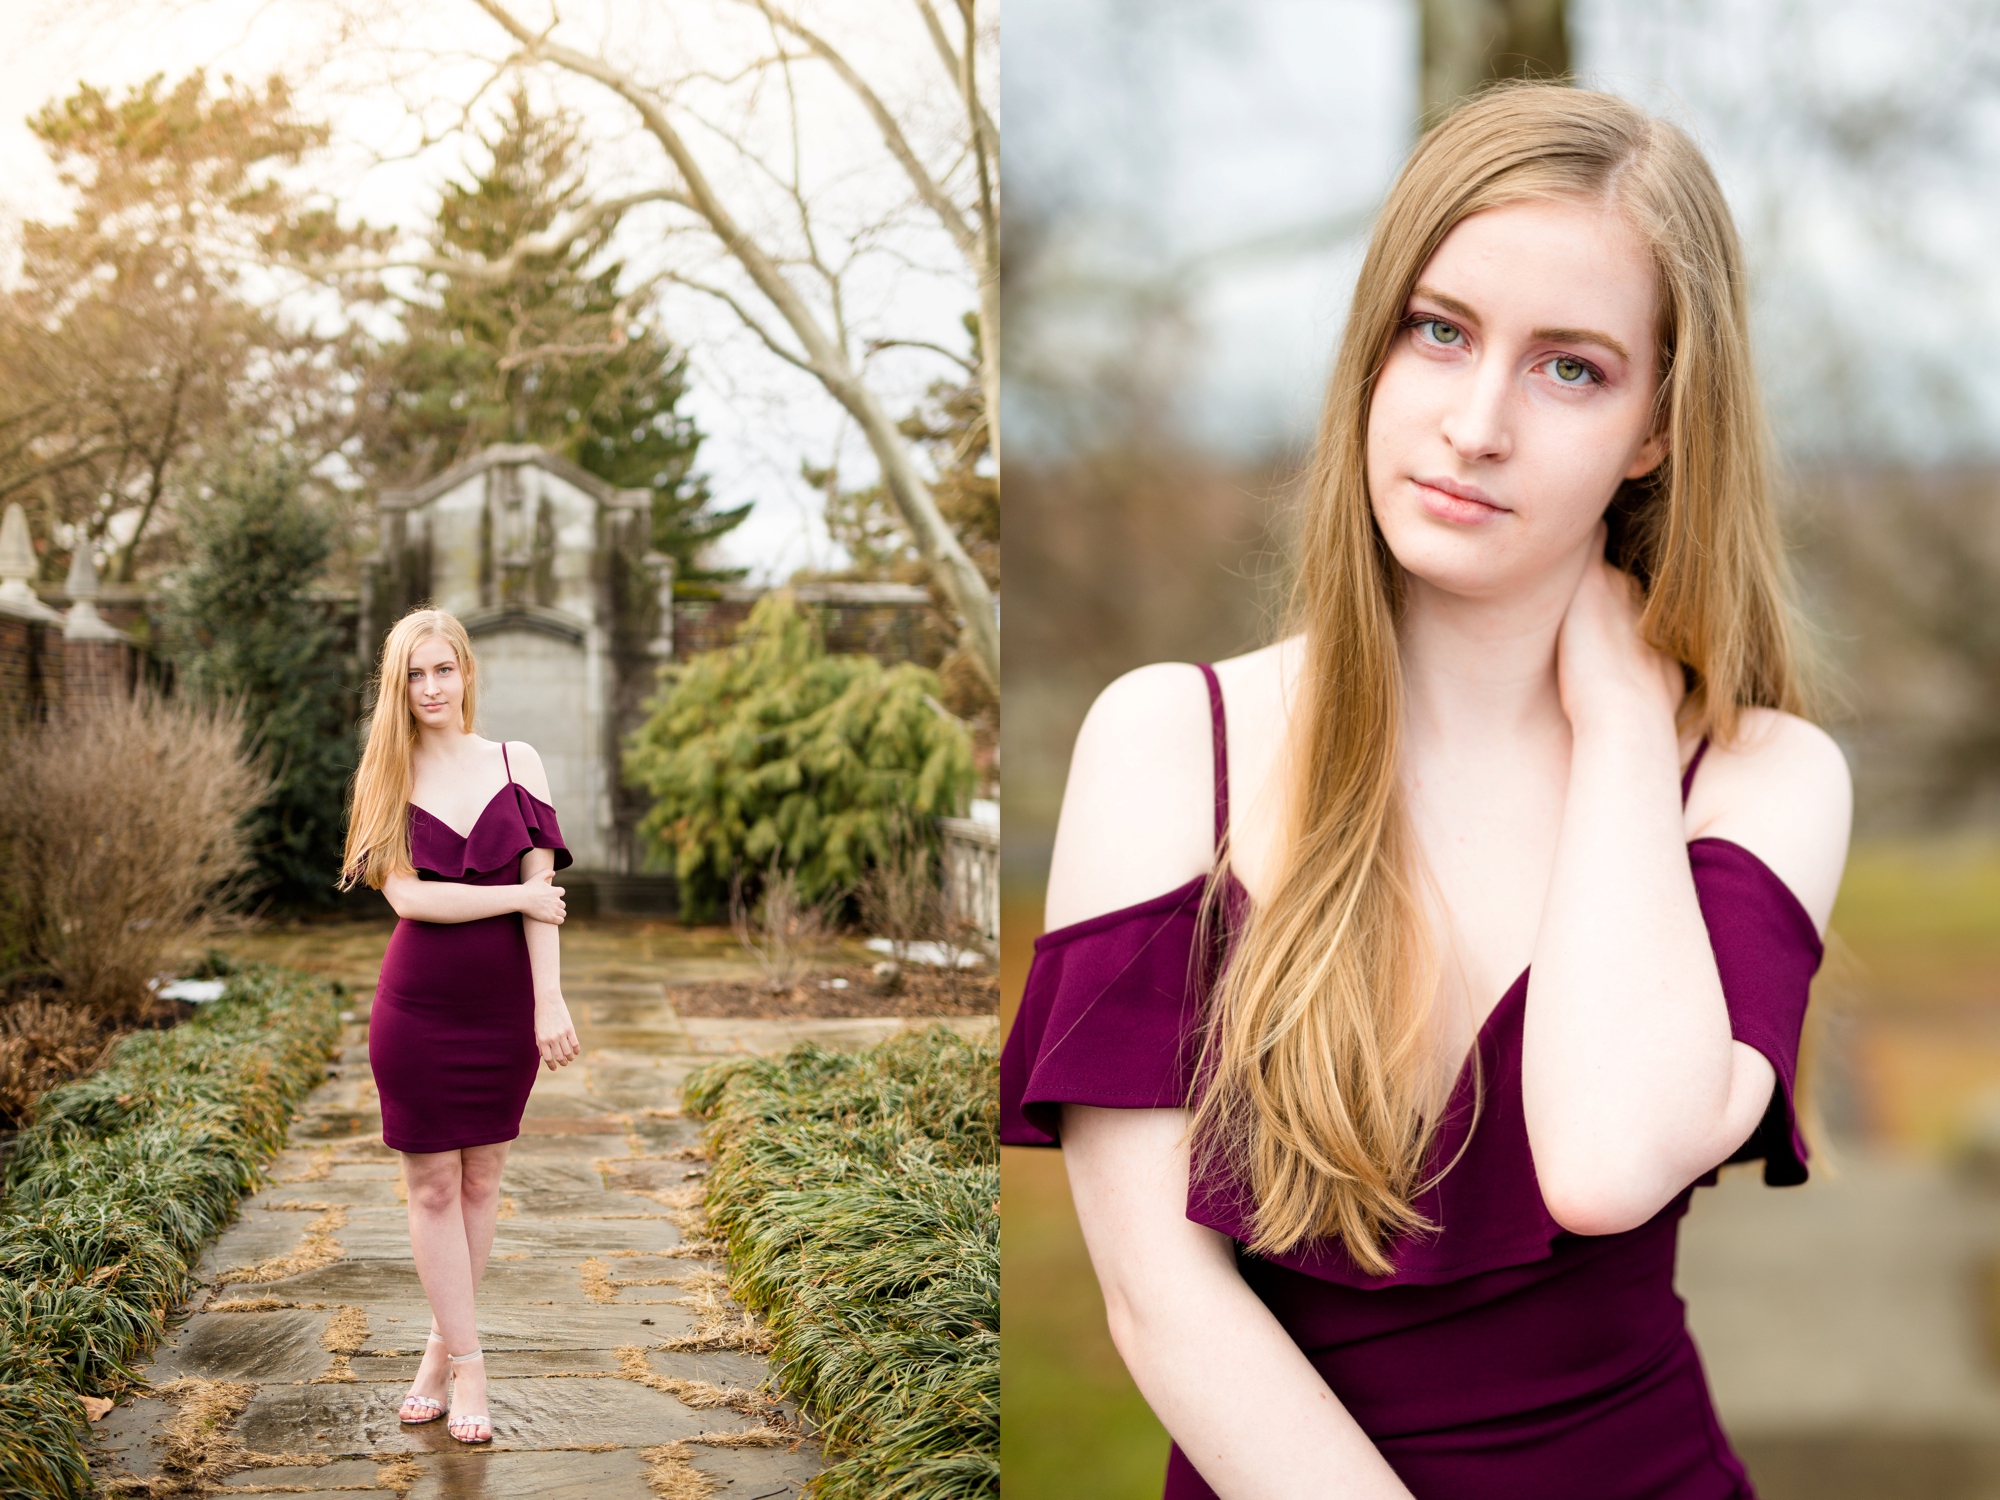 best senior photographer pittsburgh, hartwood acres senior photos, mcconnells mill senior photos, mellon park senior photos, places to take senior pictures in pittsburgh